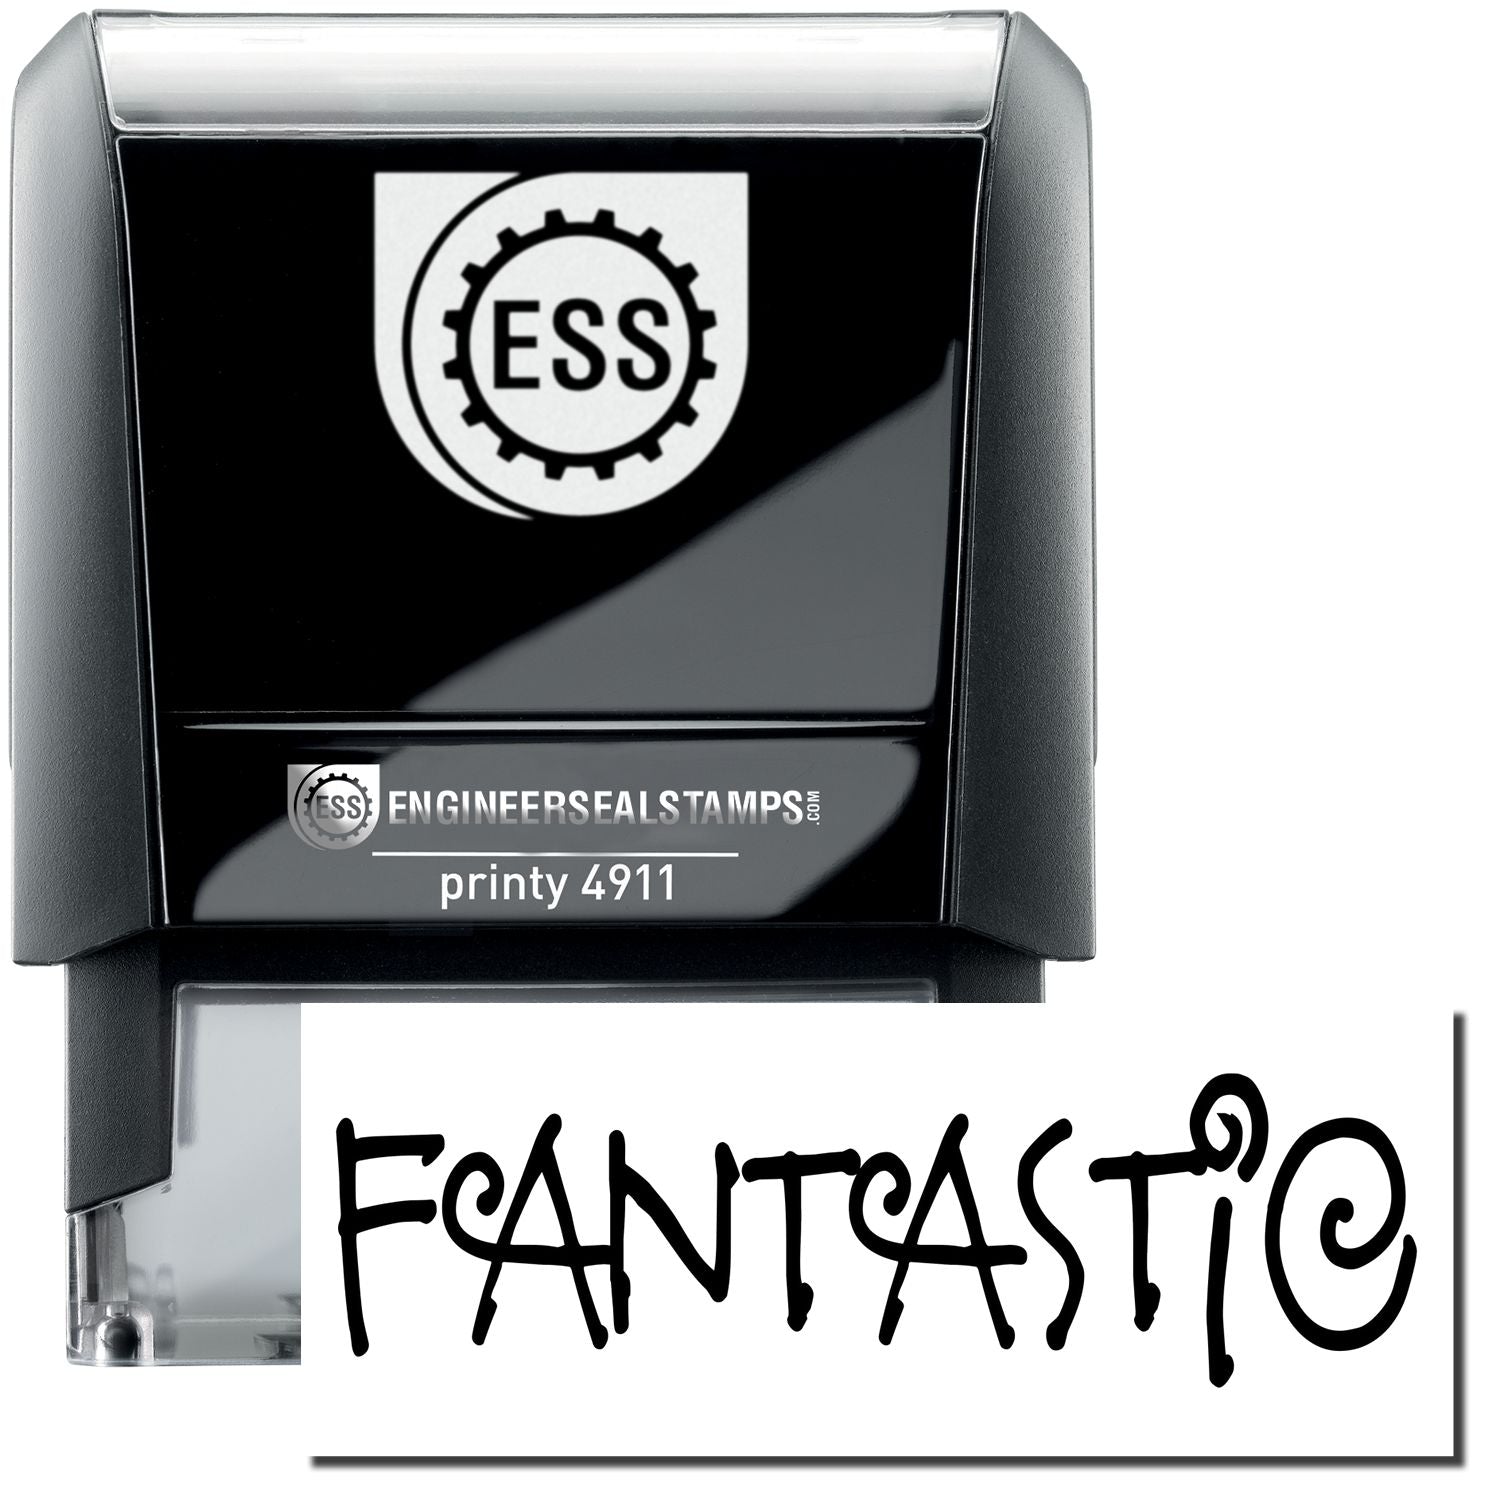 A self-inking stamp with a stamped image showing how the text "FANTASTIC" is displayed after stamping.